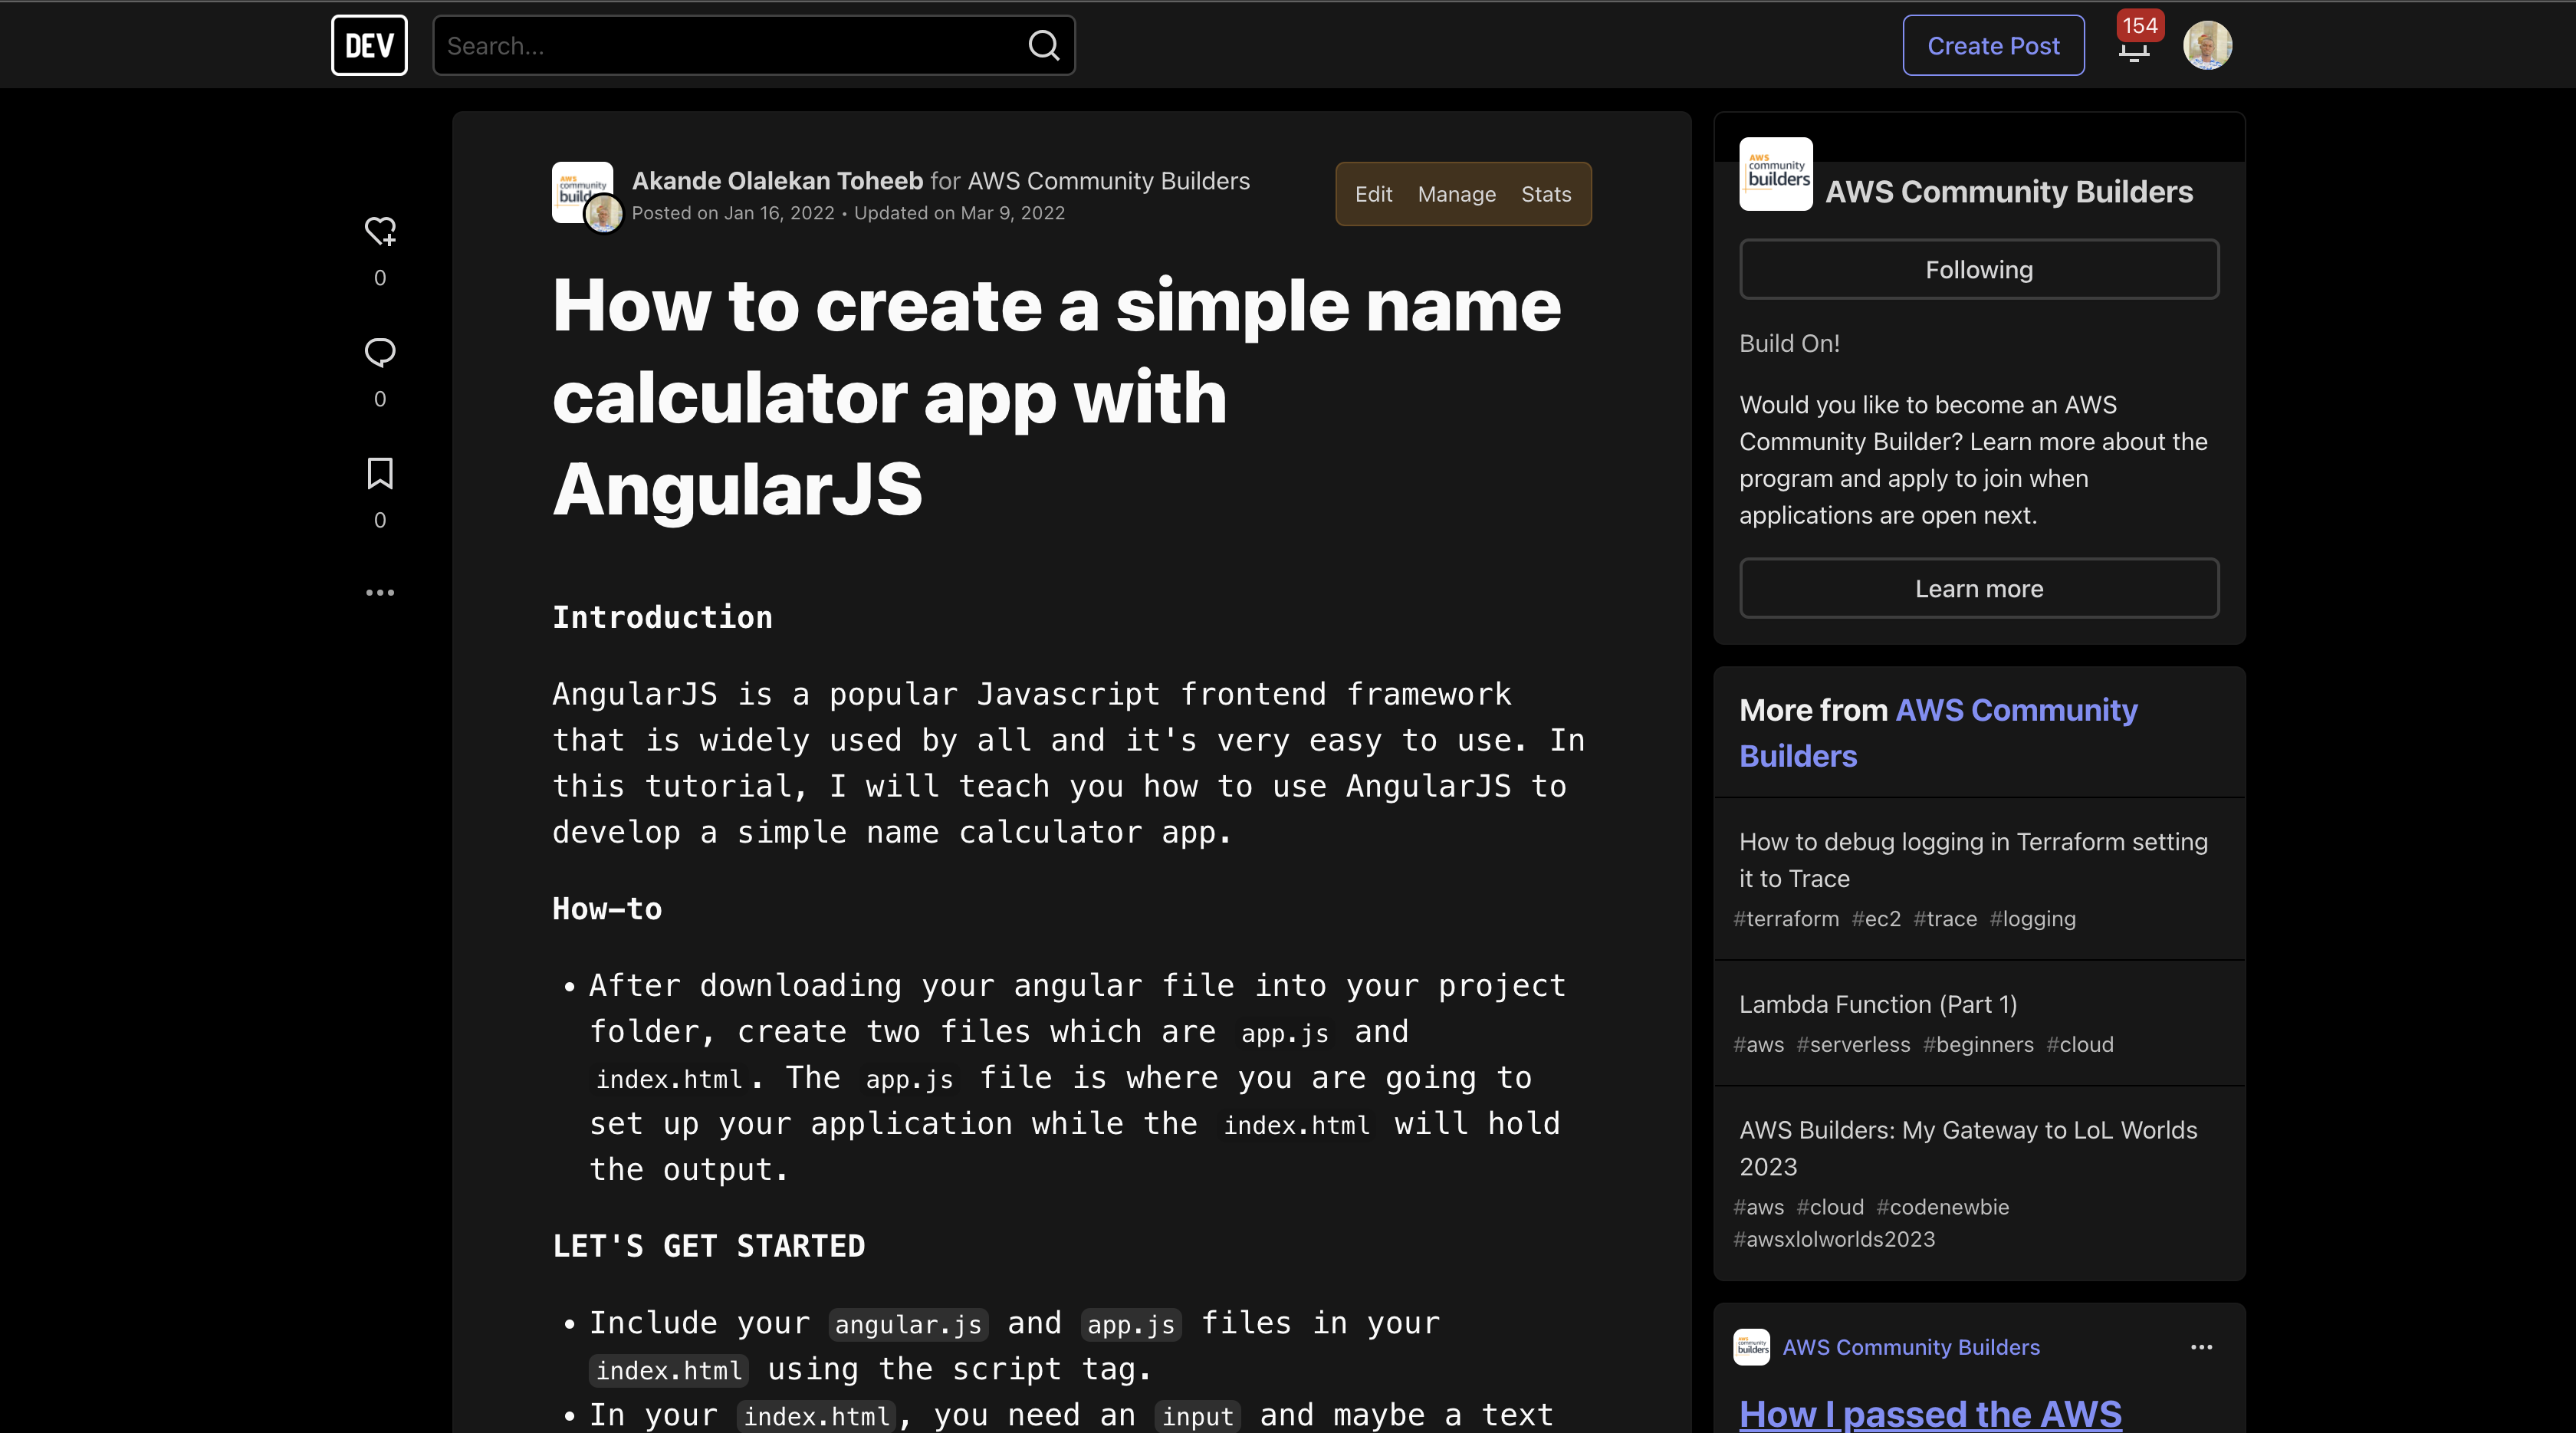 How to create a simple name calculator app with AngularJS